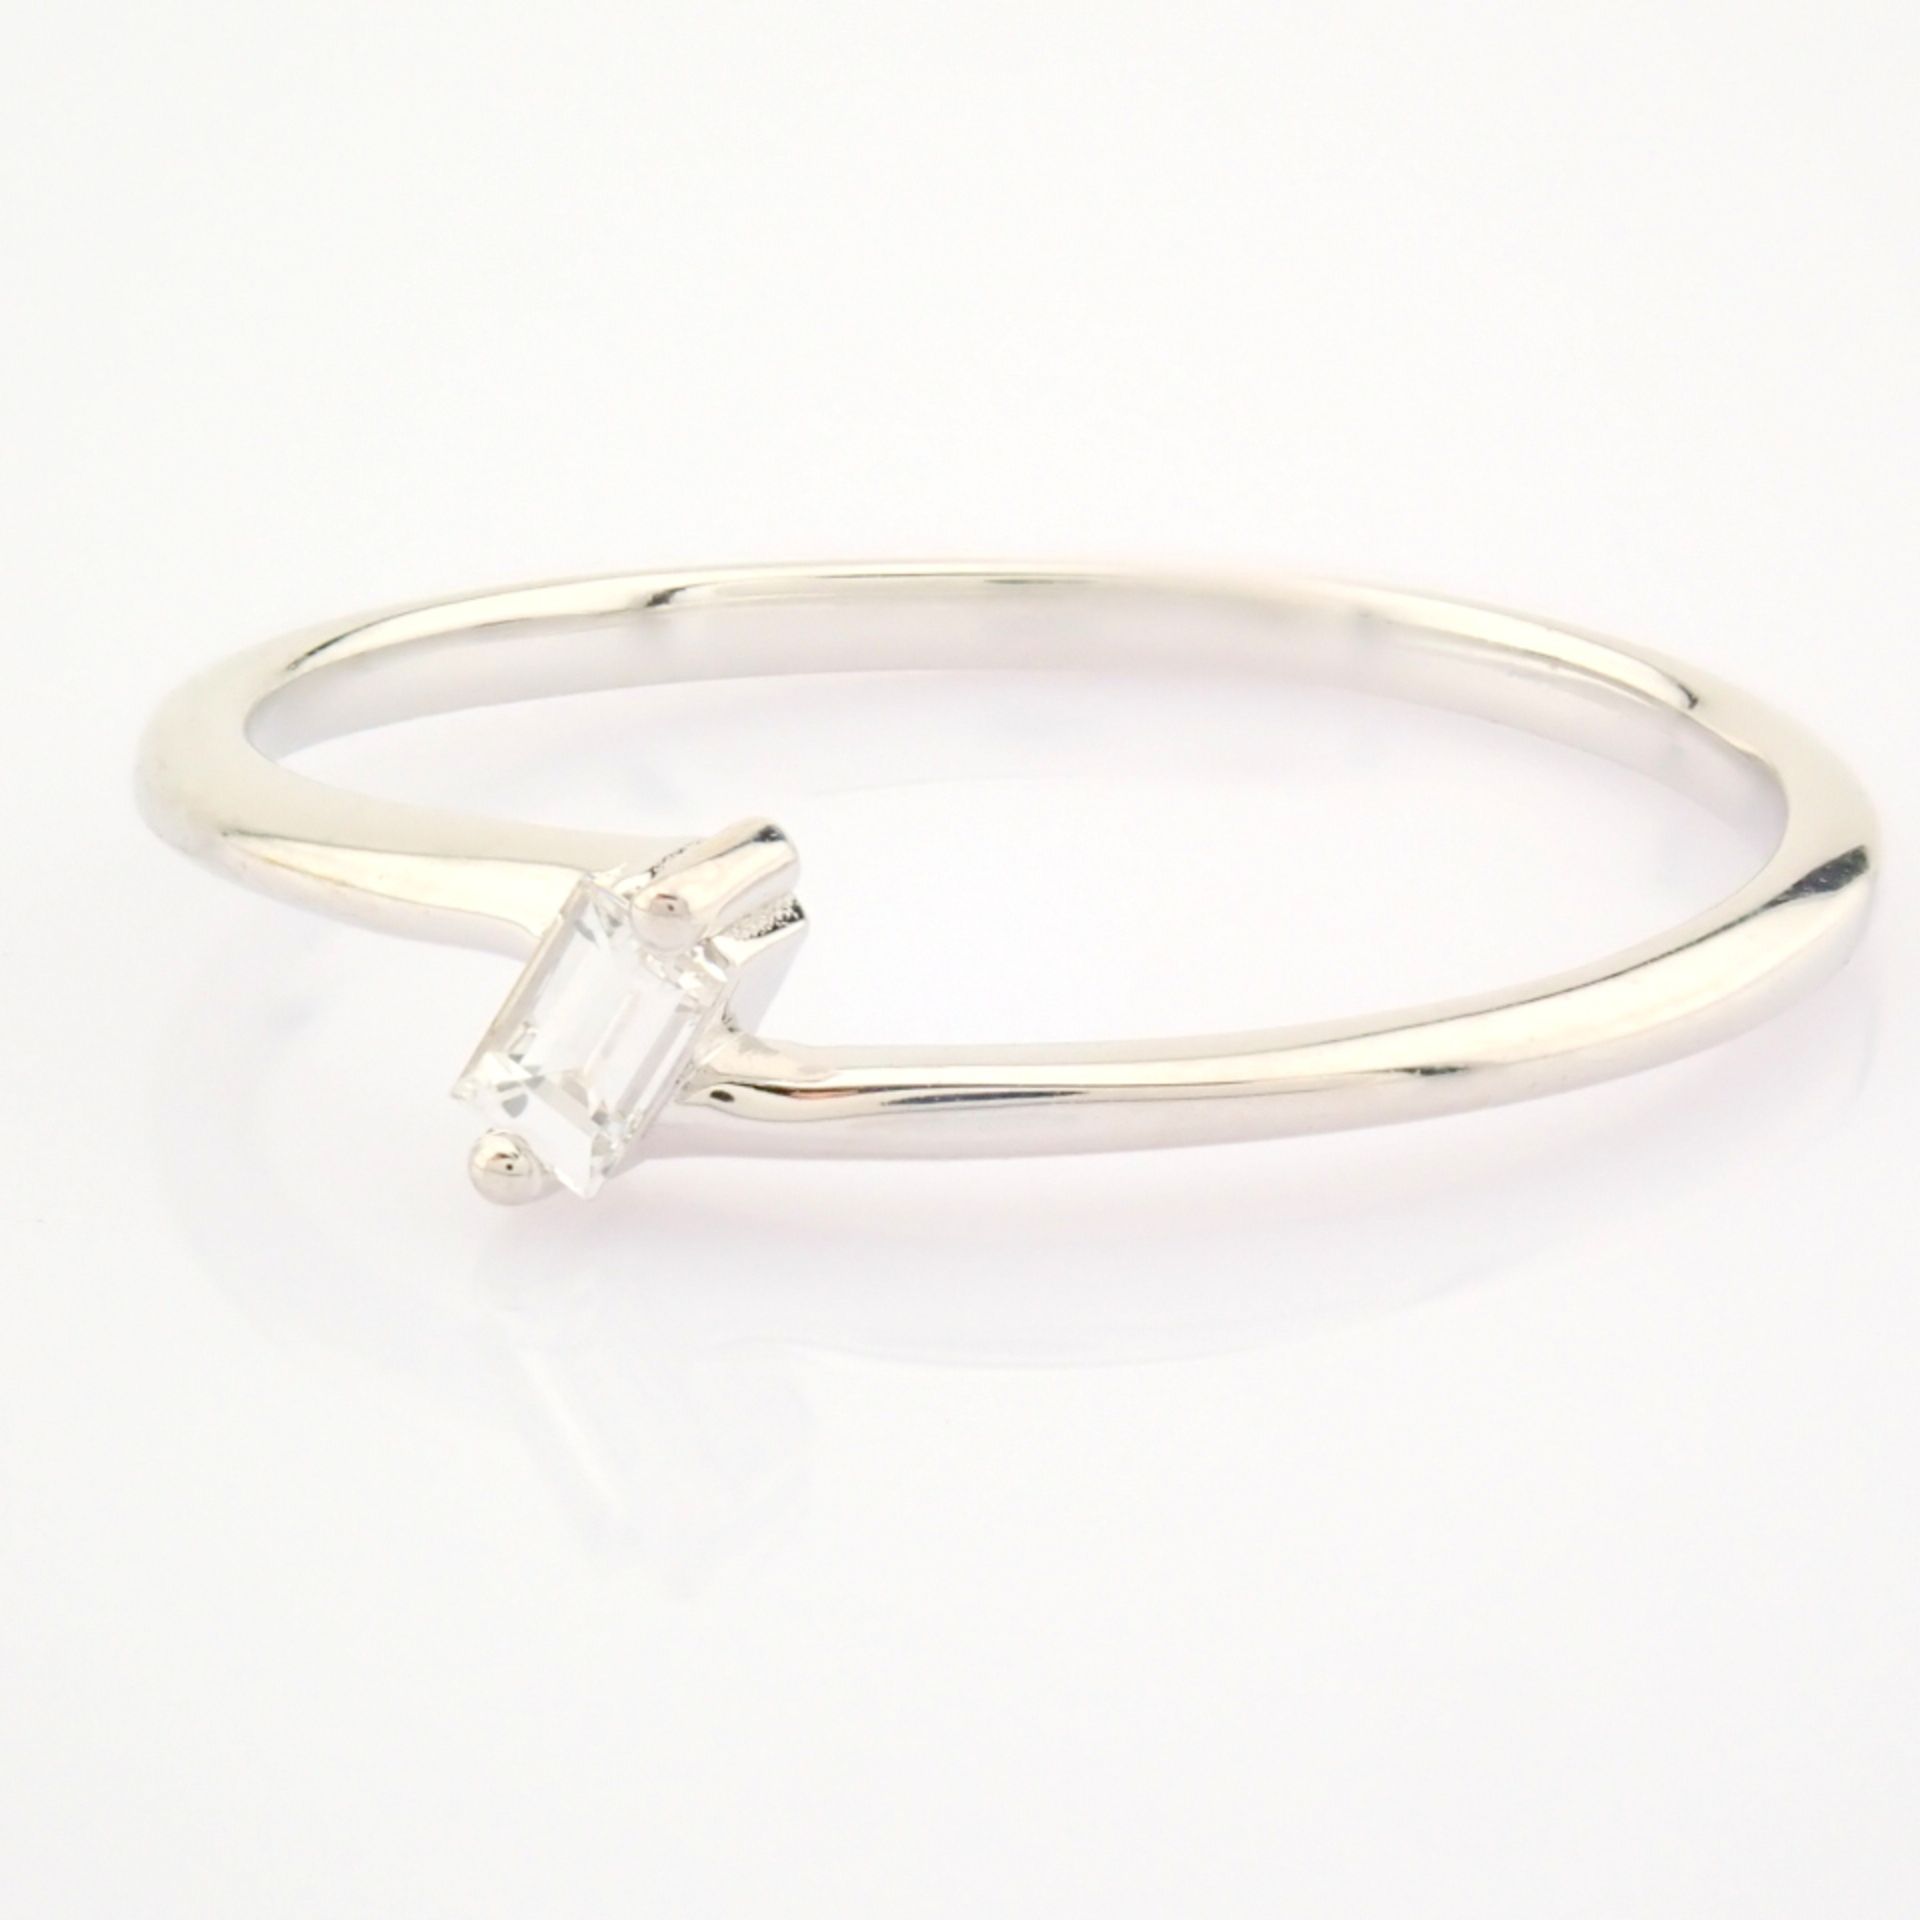 Certificated 14K White Gold Diamond Ring - Image 8 of 11